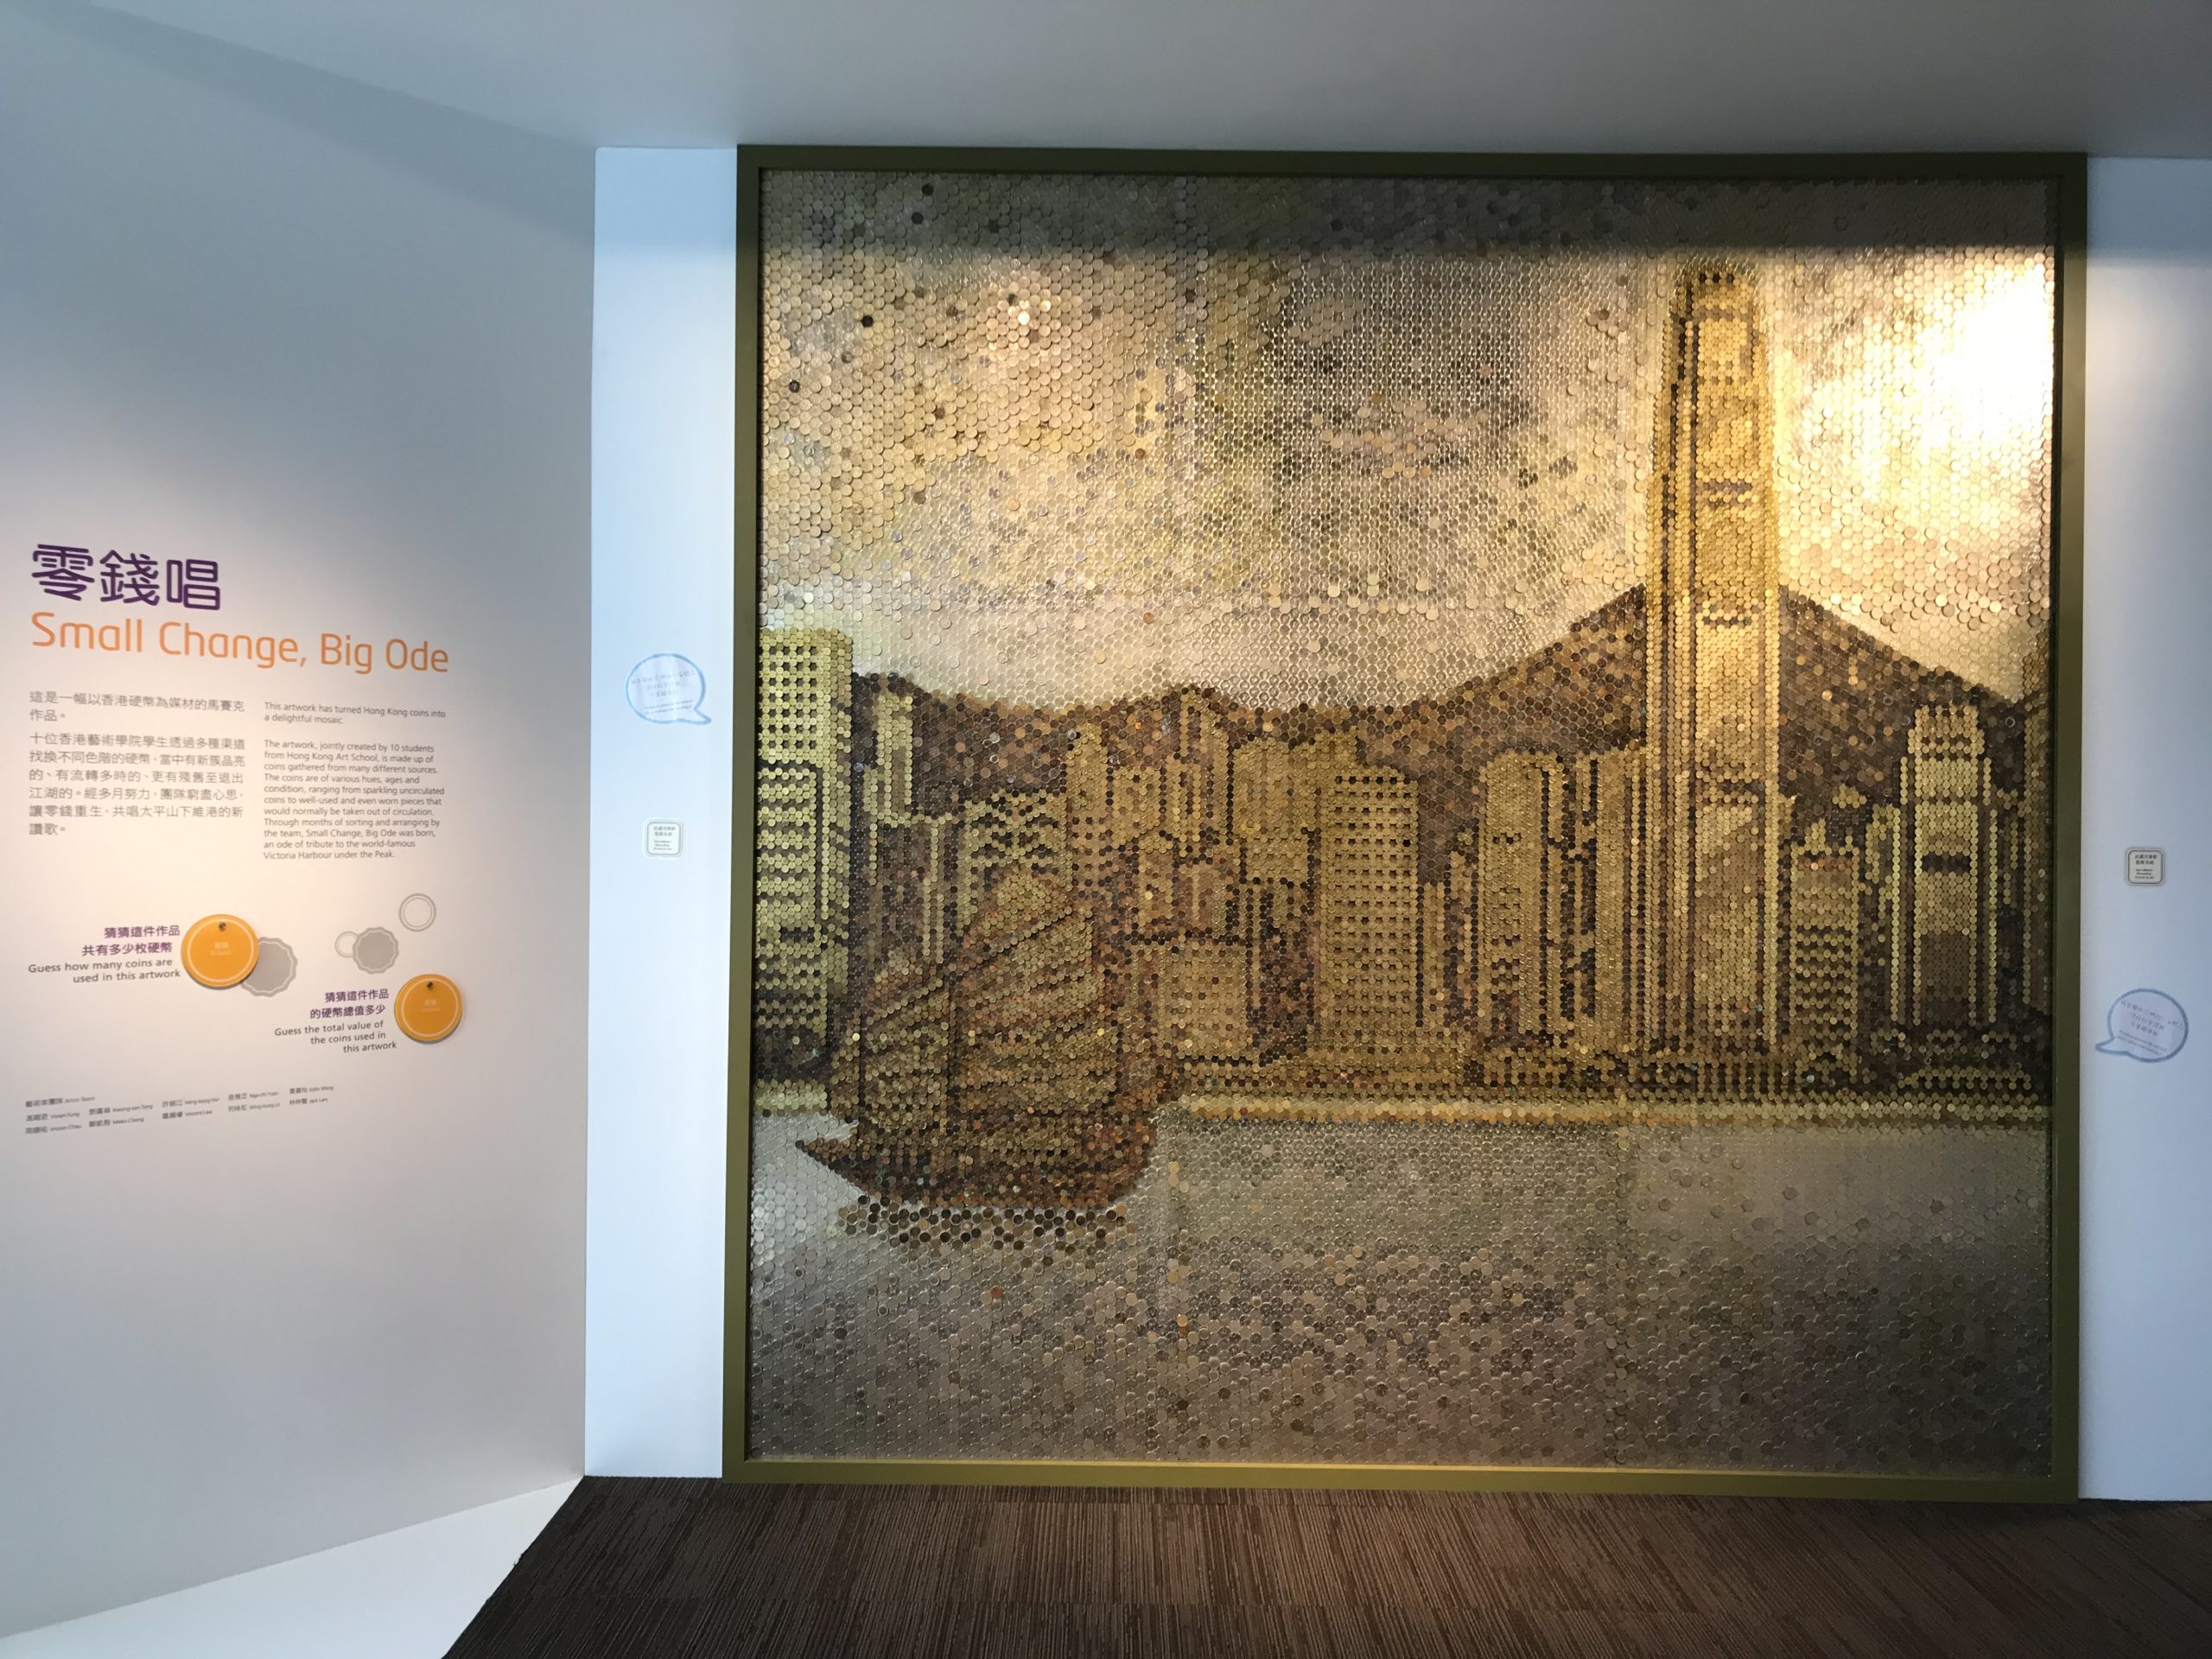 Artwork "Small Change, Big Ode", crafted entirely from Hong Kong coins